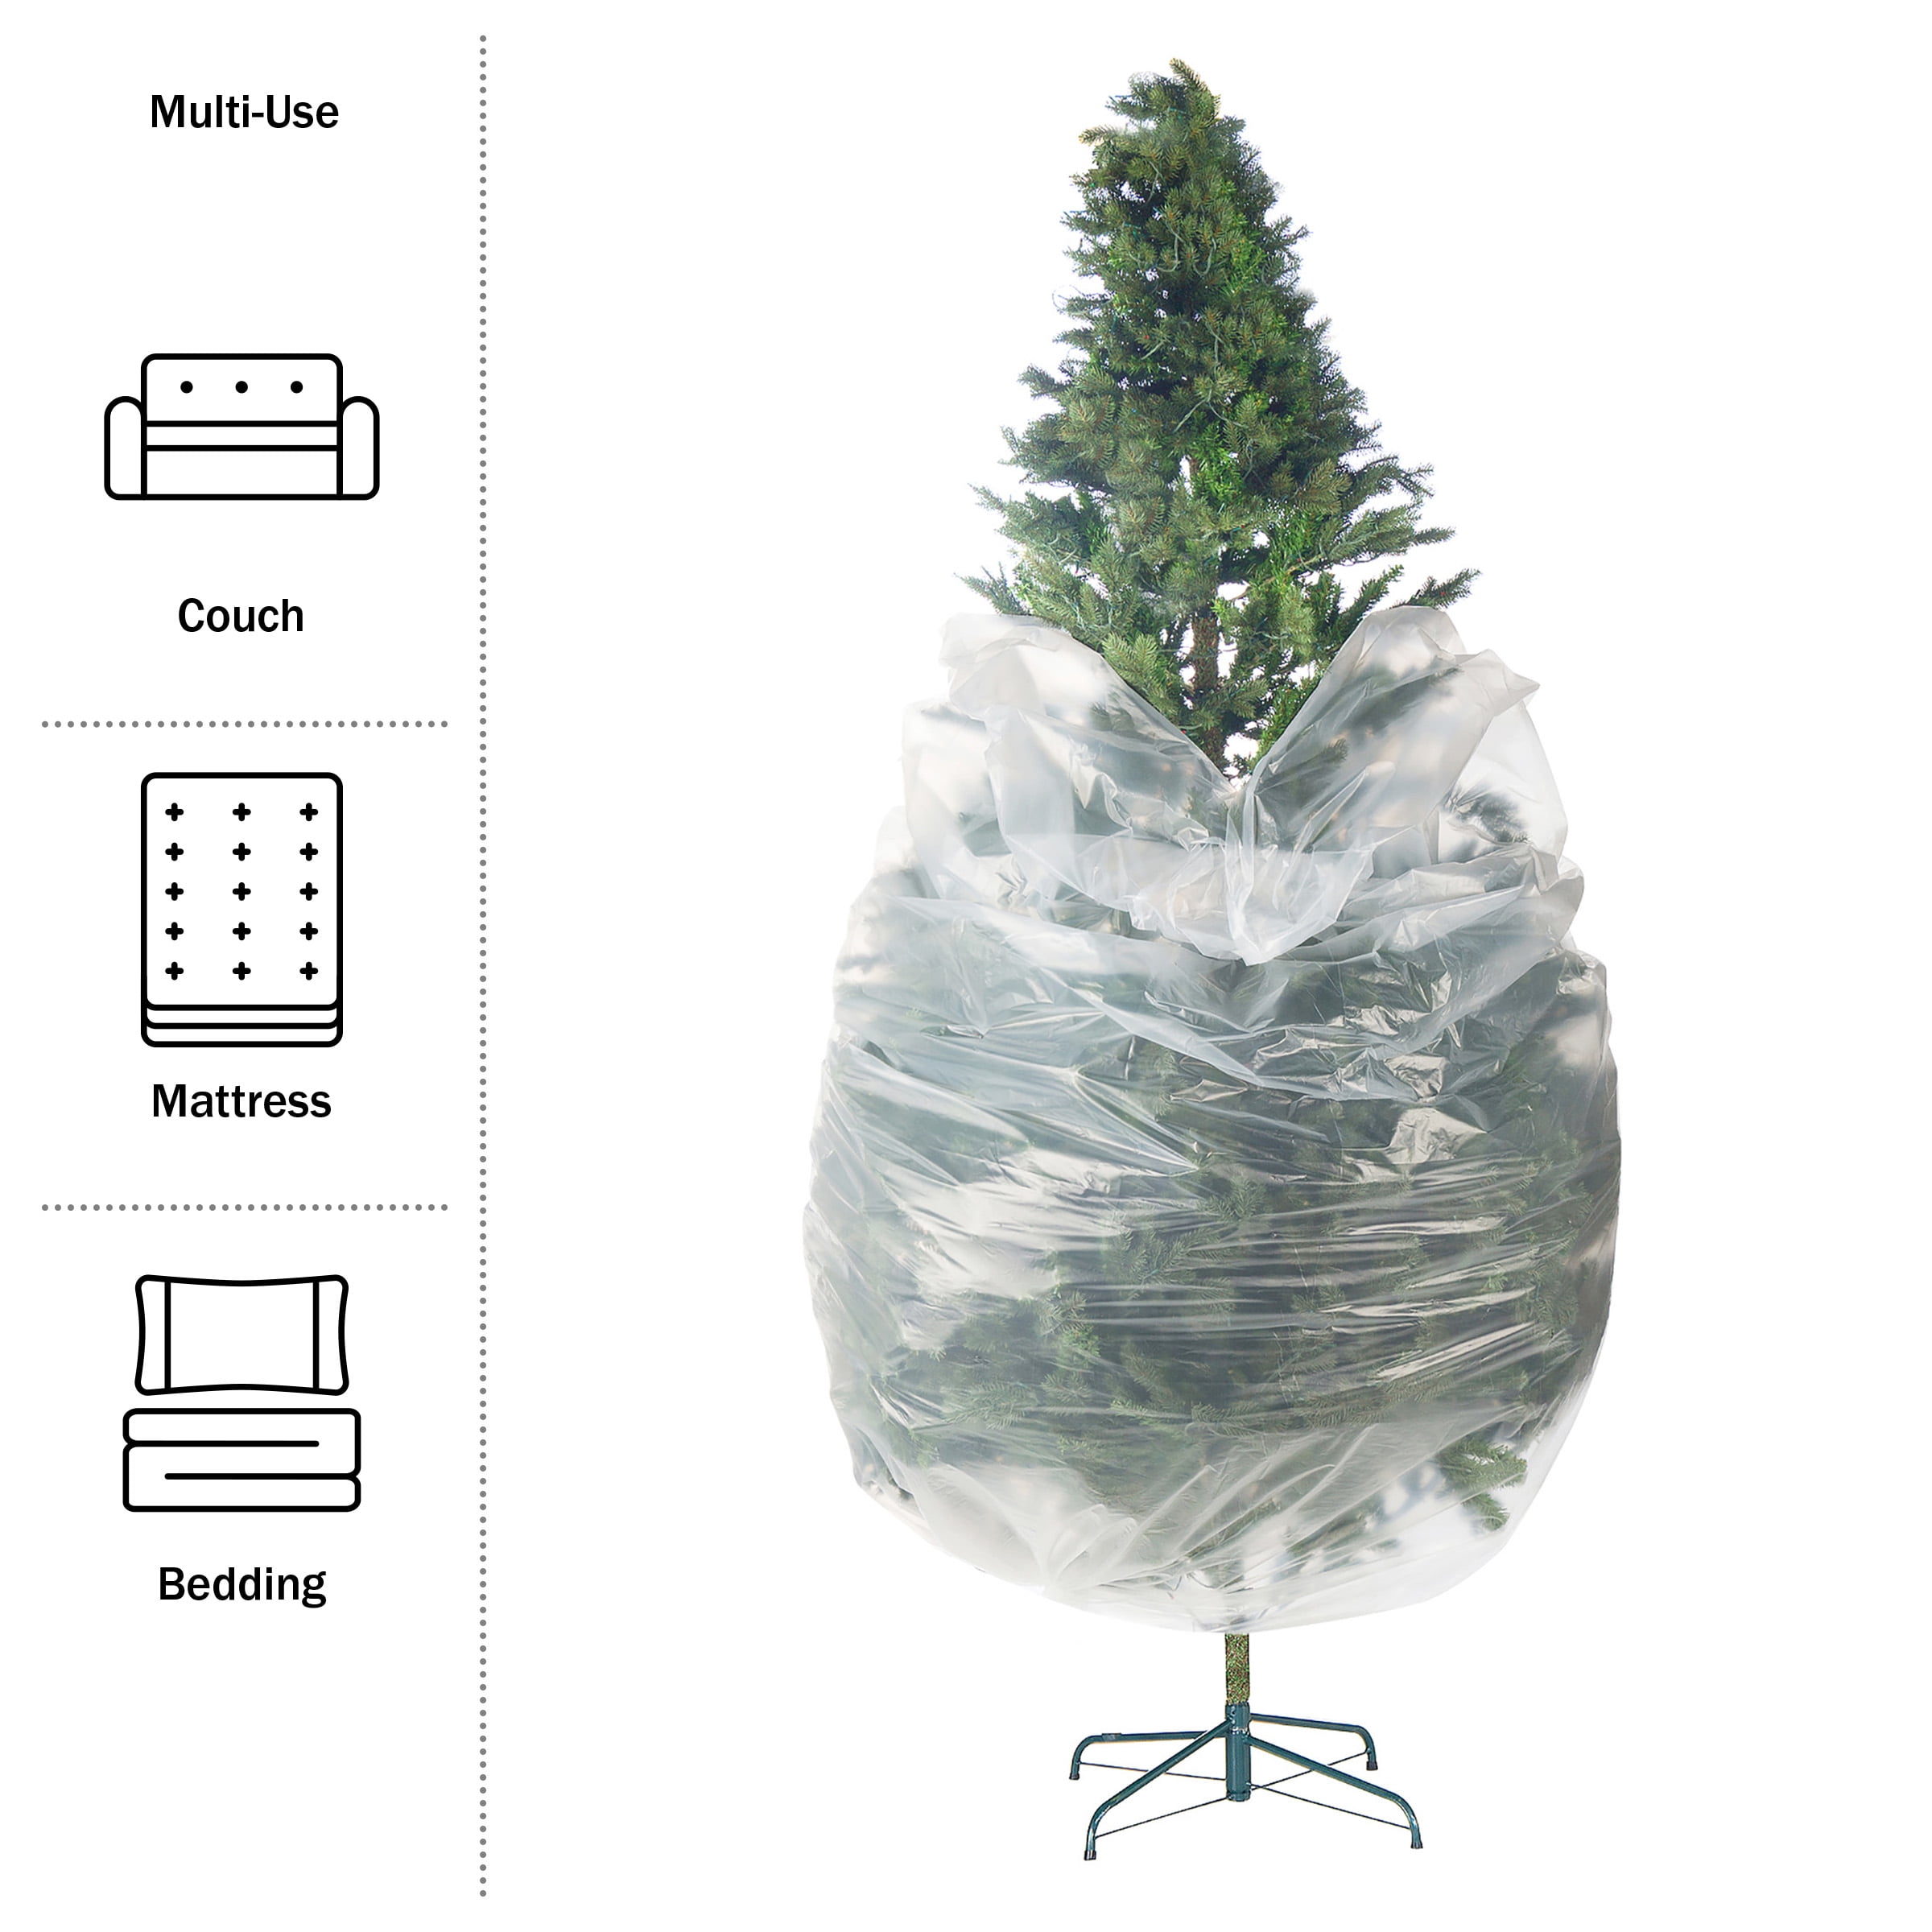 Pursell Manufacturing Christmas Tree Disposal and Storage Bag - Fits Trees to 9-Feet 5-Inches (Standard Version)